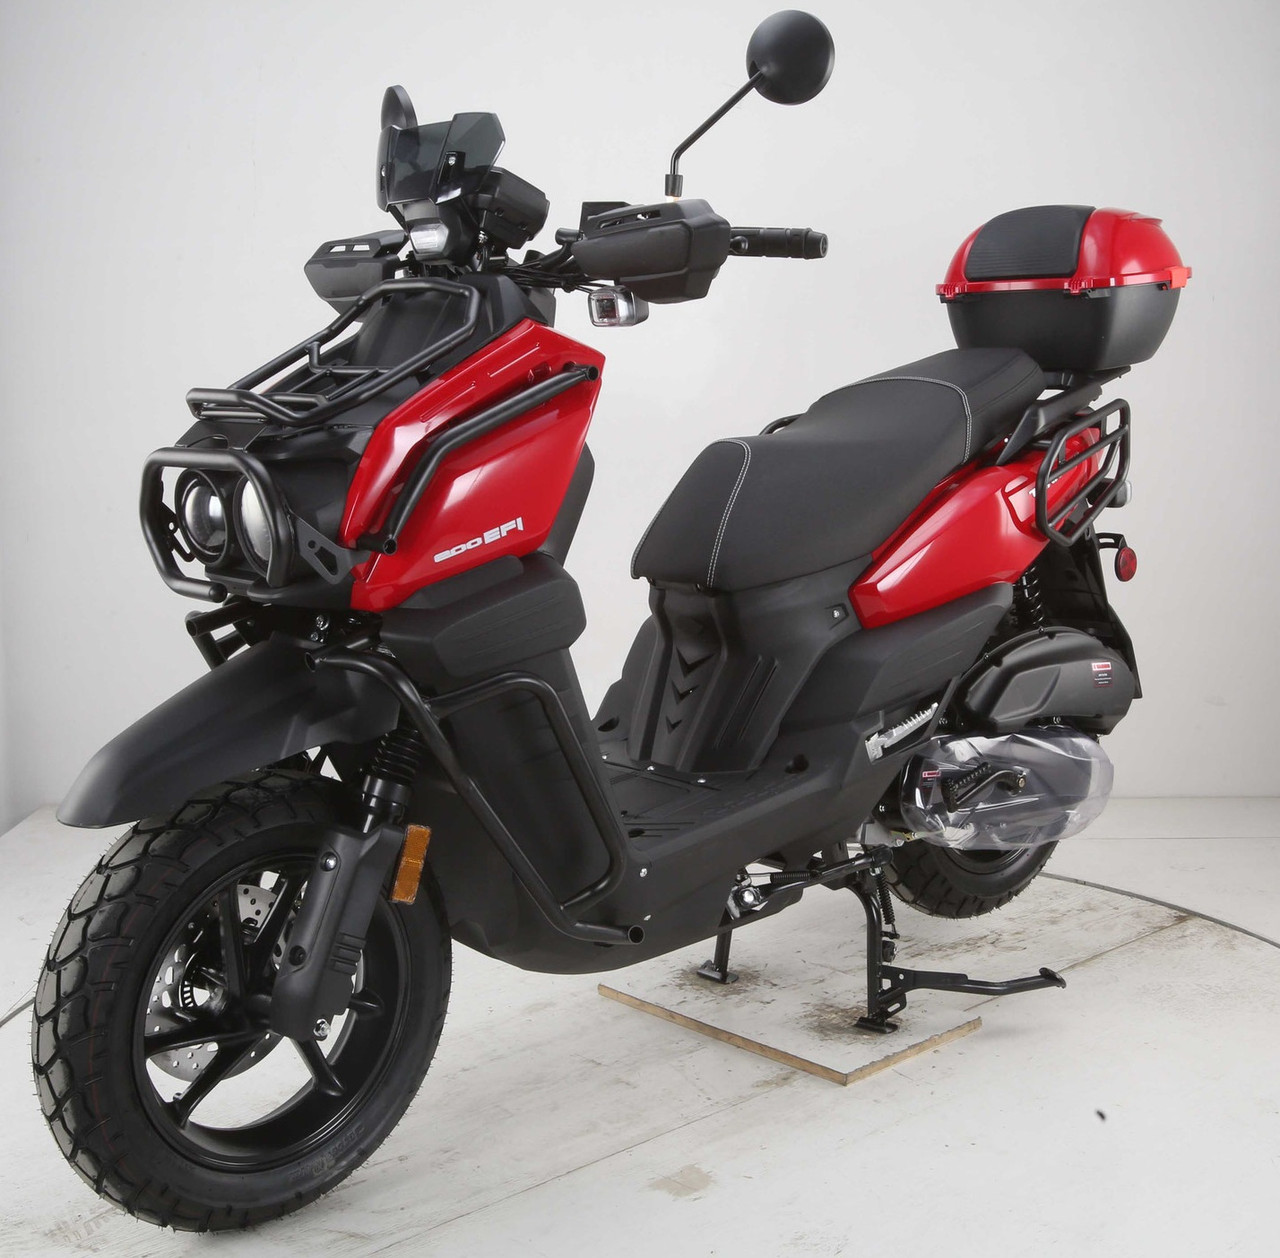 Vitacci Tank 200 EFI Scooter, (GY6) 4-Stroke, Air cooled, Alloy RIM - Fully Assembled and Tested